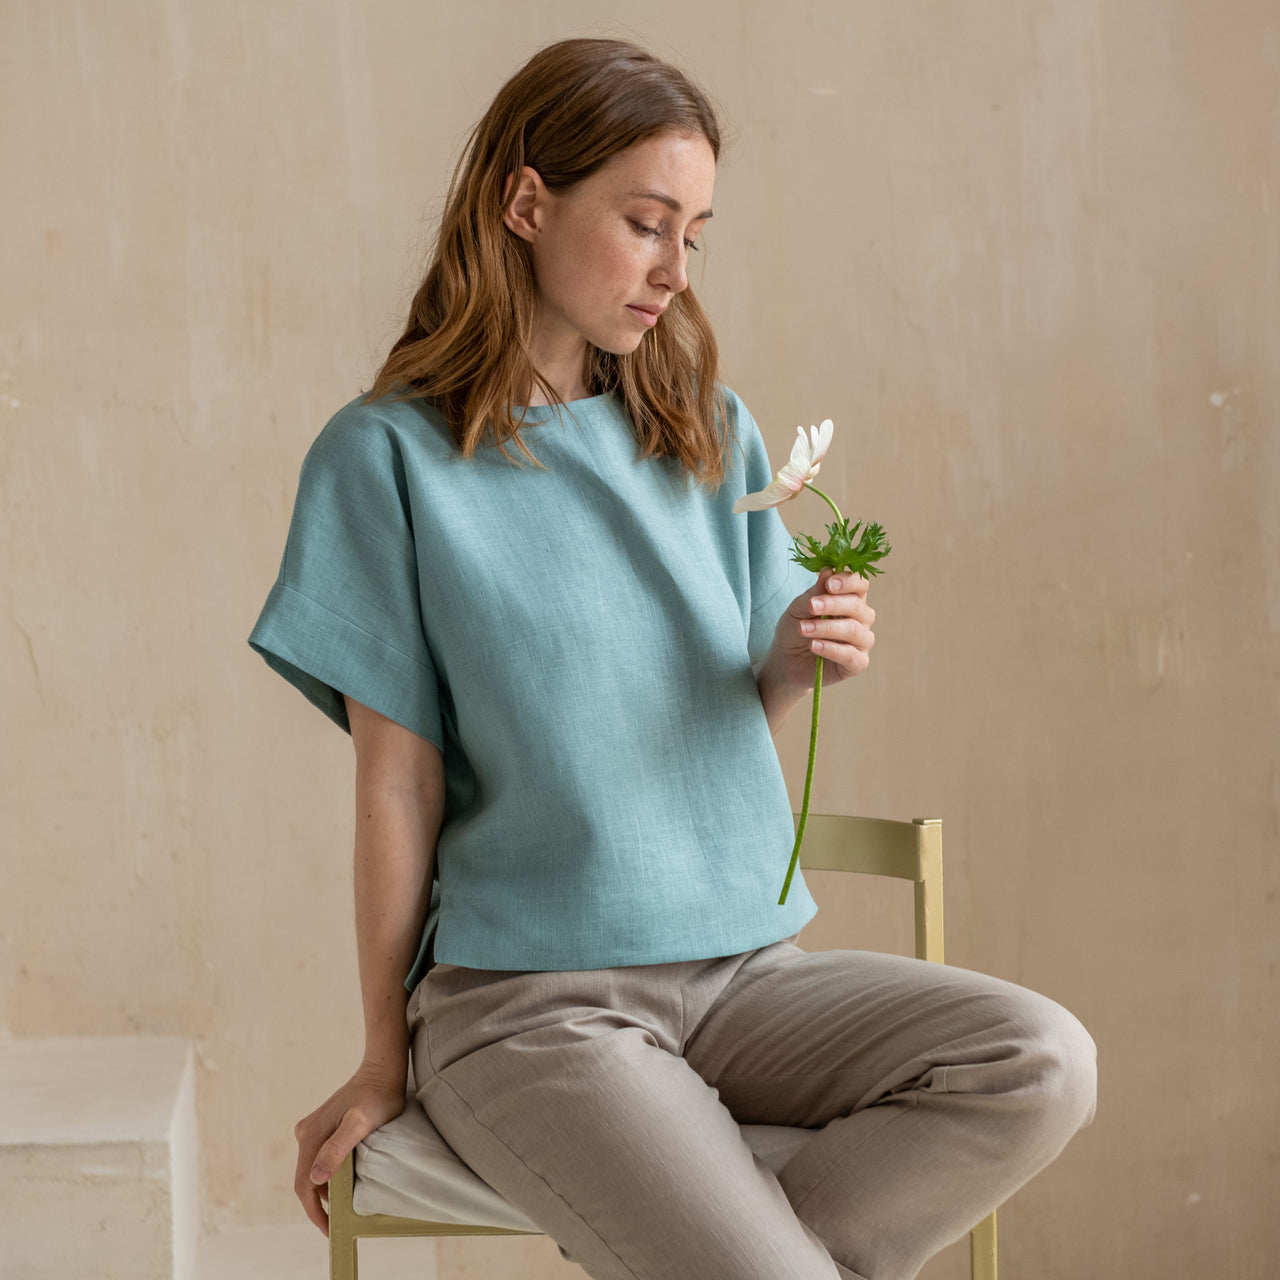 Linen Clothing for Women - 100% Natural French Linen